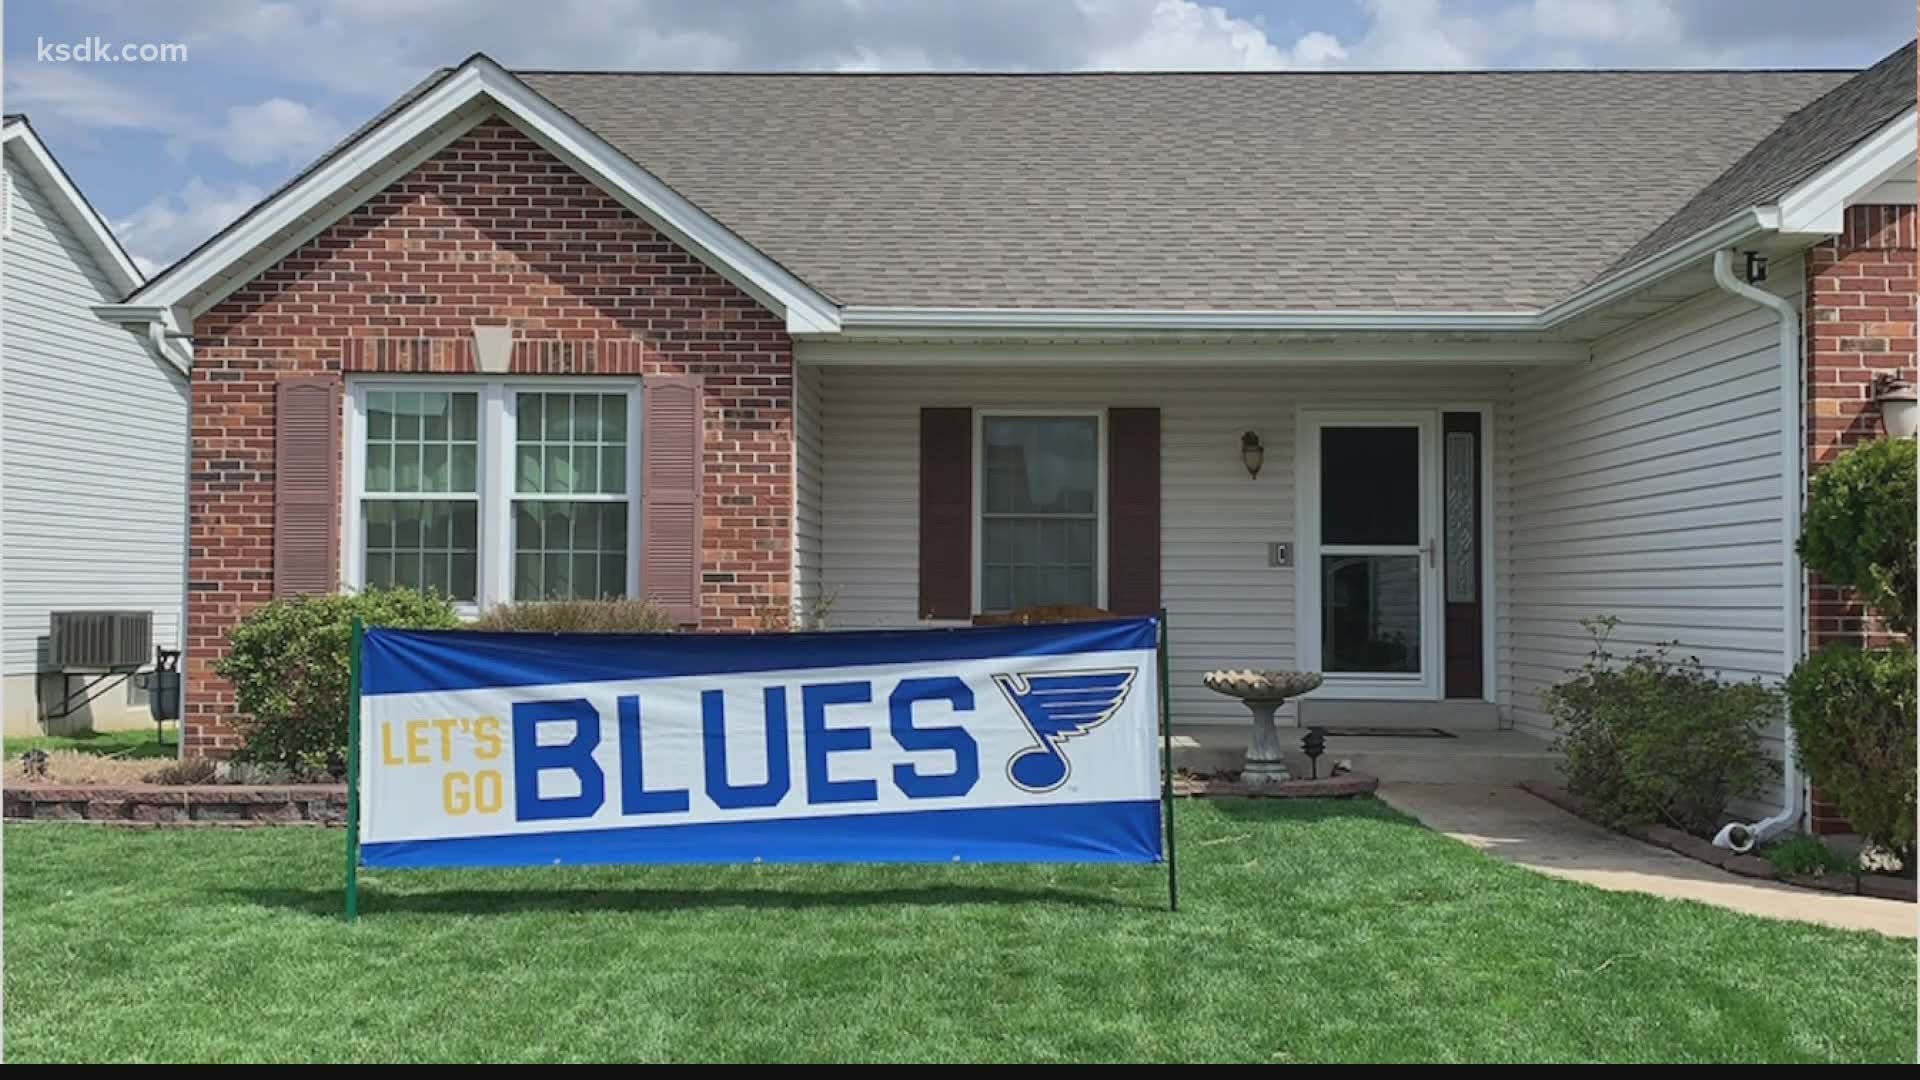 Use #WeAllBleedBlue on Instagram or Twitter for a chance to win prizes. Purchase the banner at STLAuthentics.com.